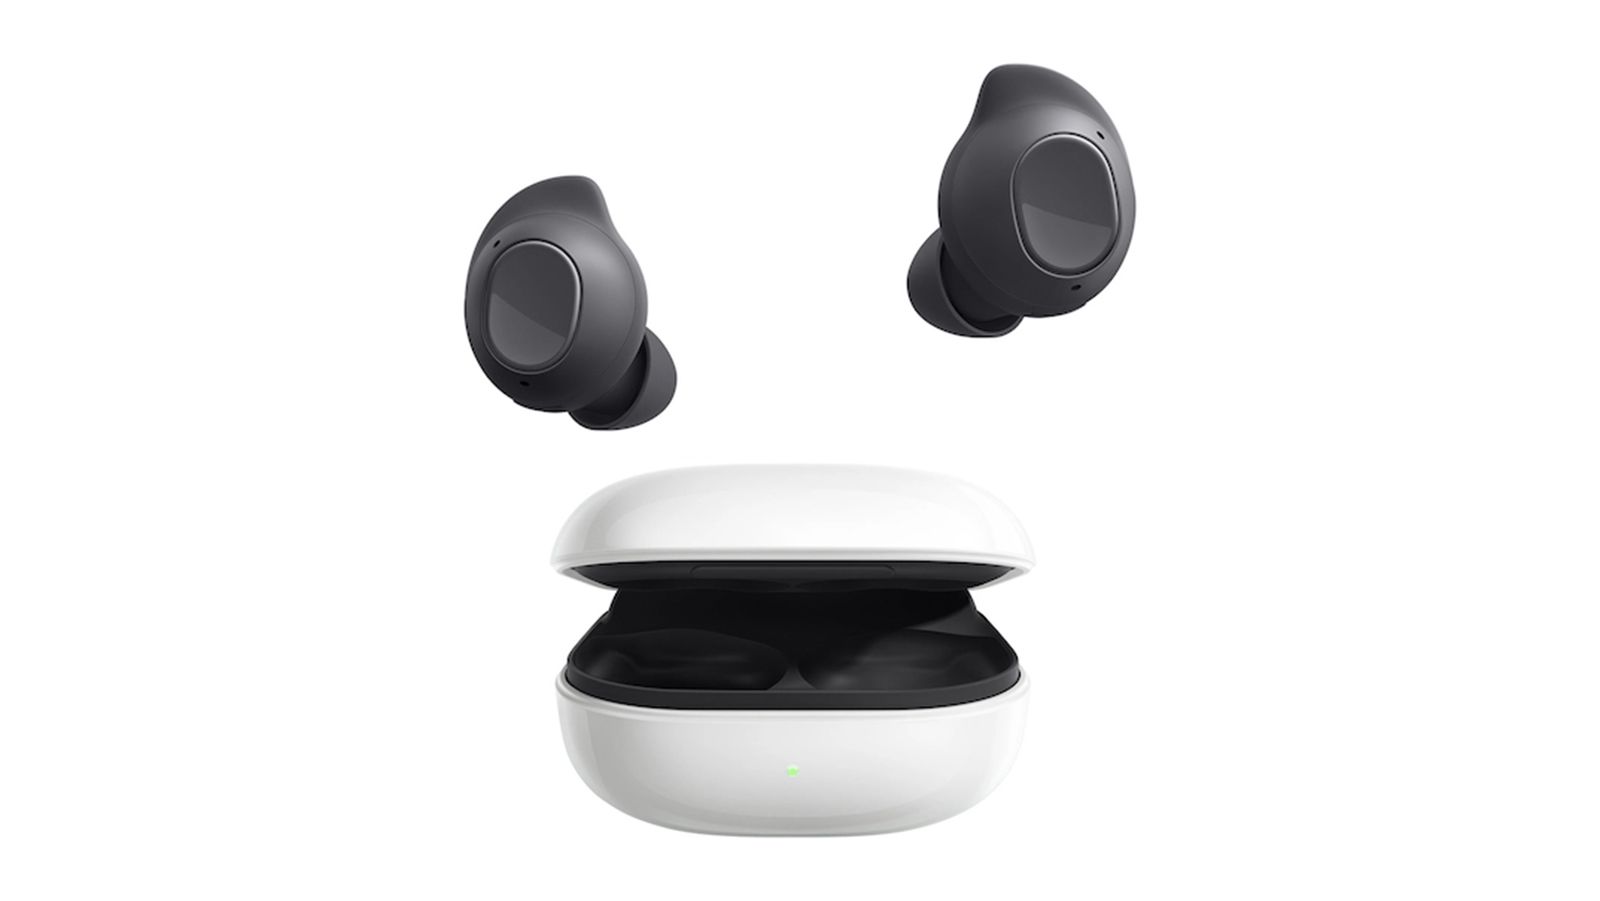 Is Samsung working on the Galaxy Buds FE? - PhoneArena